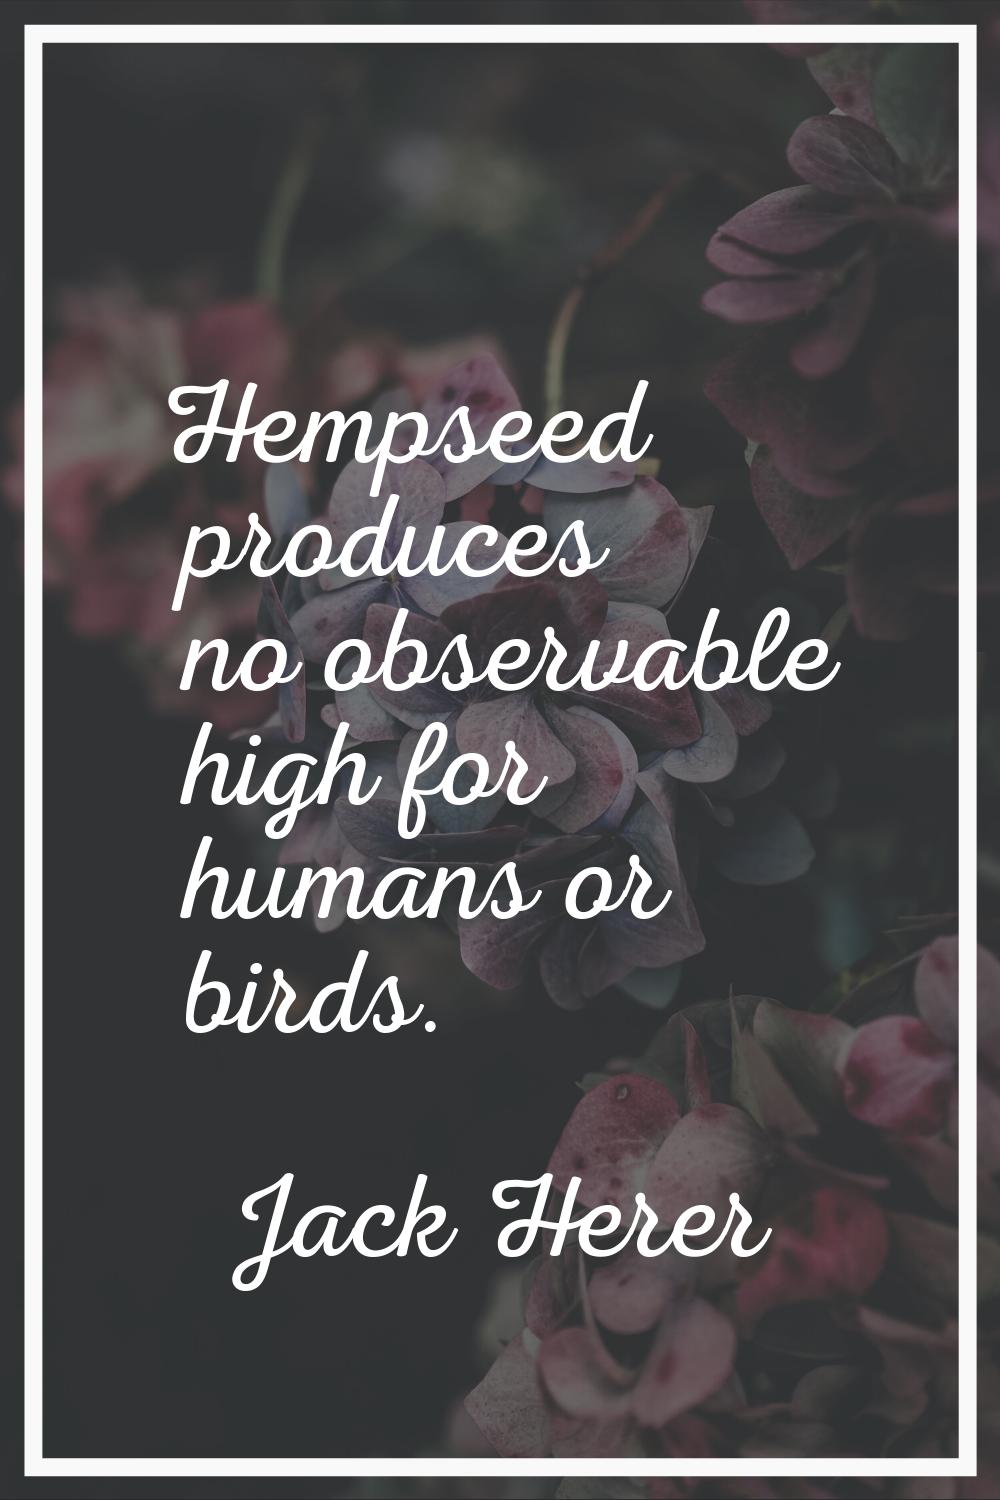 Hempseed produces no observable high for humans or birds.